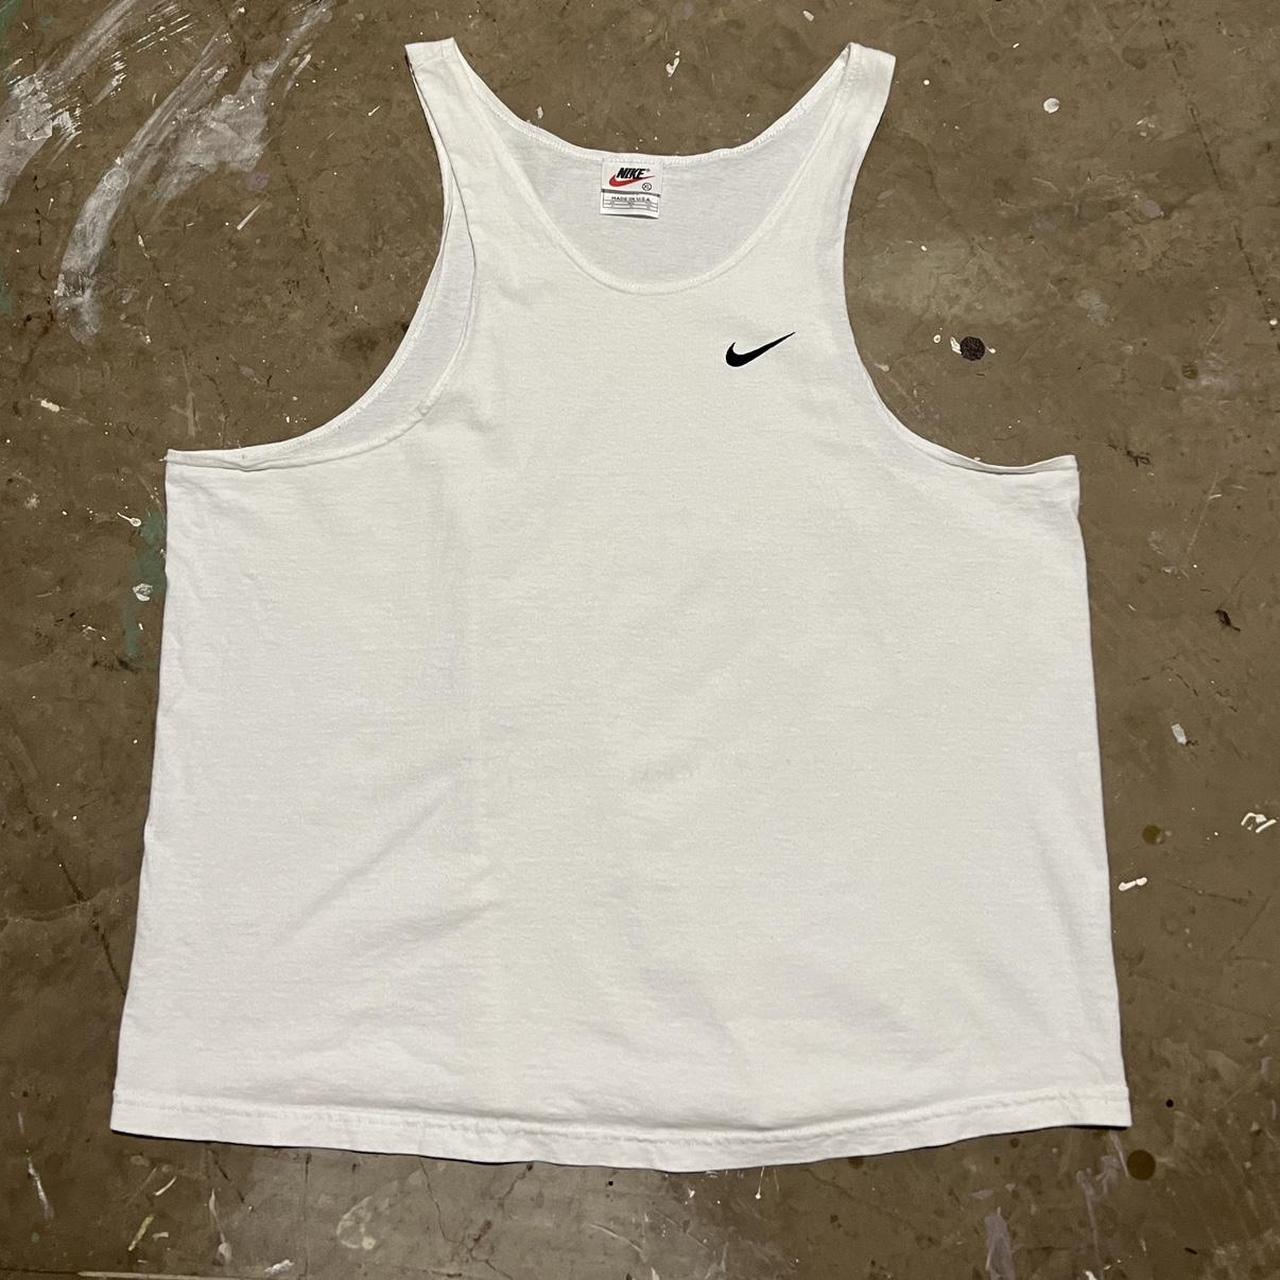 Nike tank top workout tank top with embroidered logo - Depop